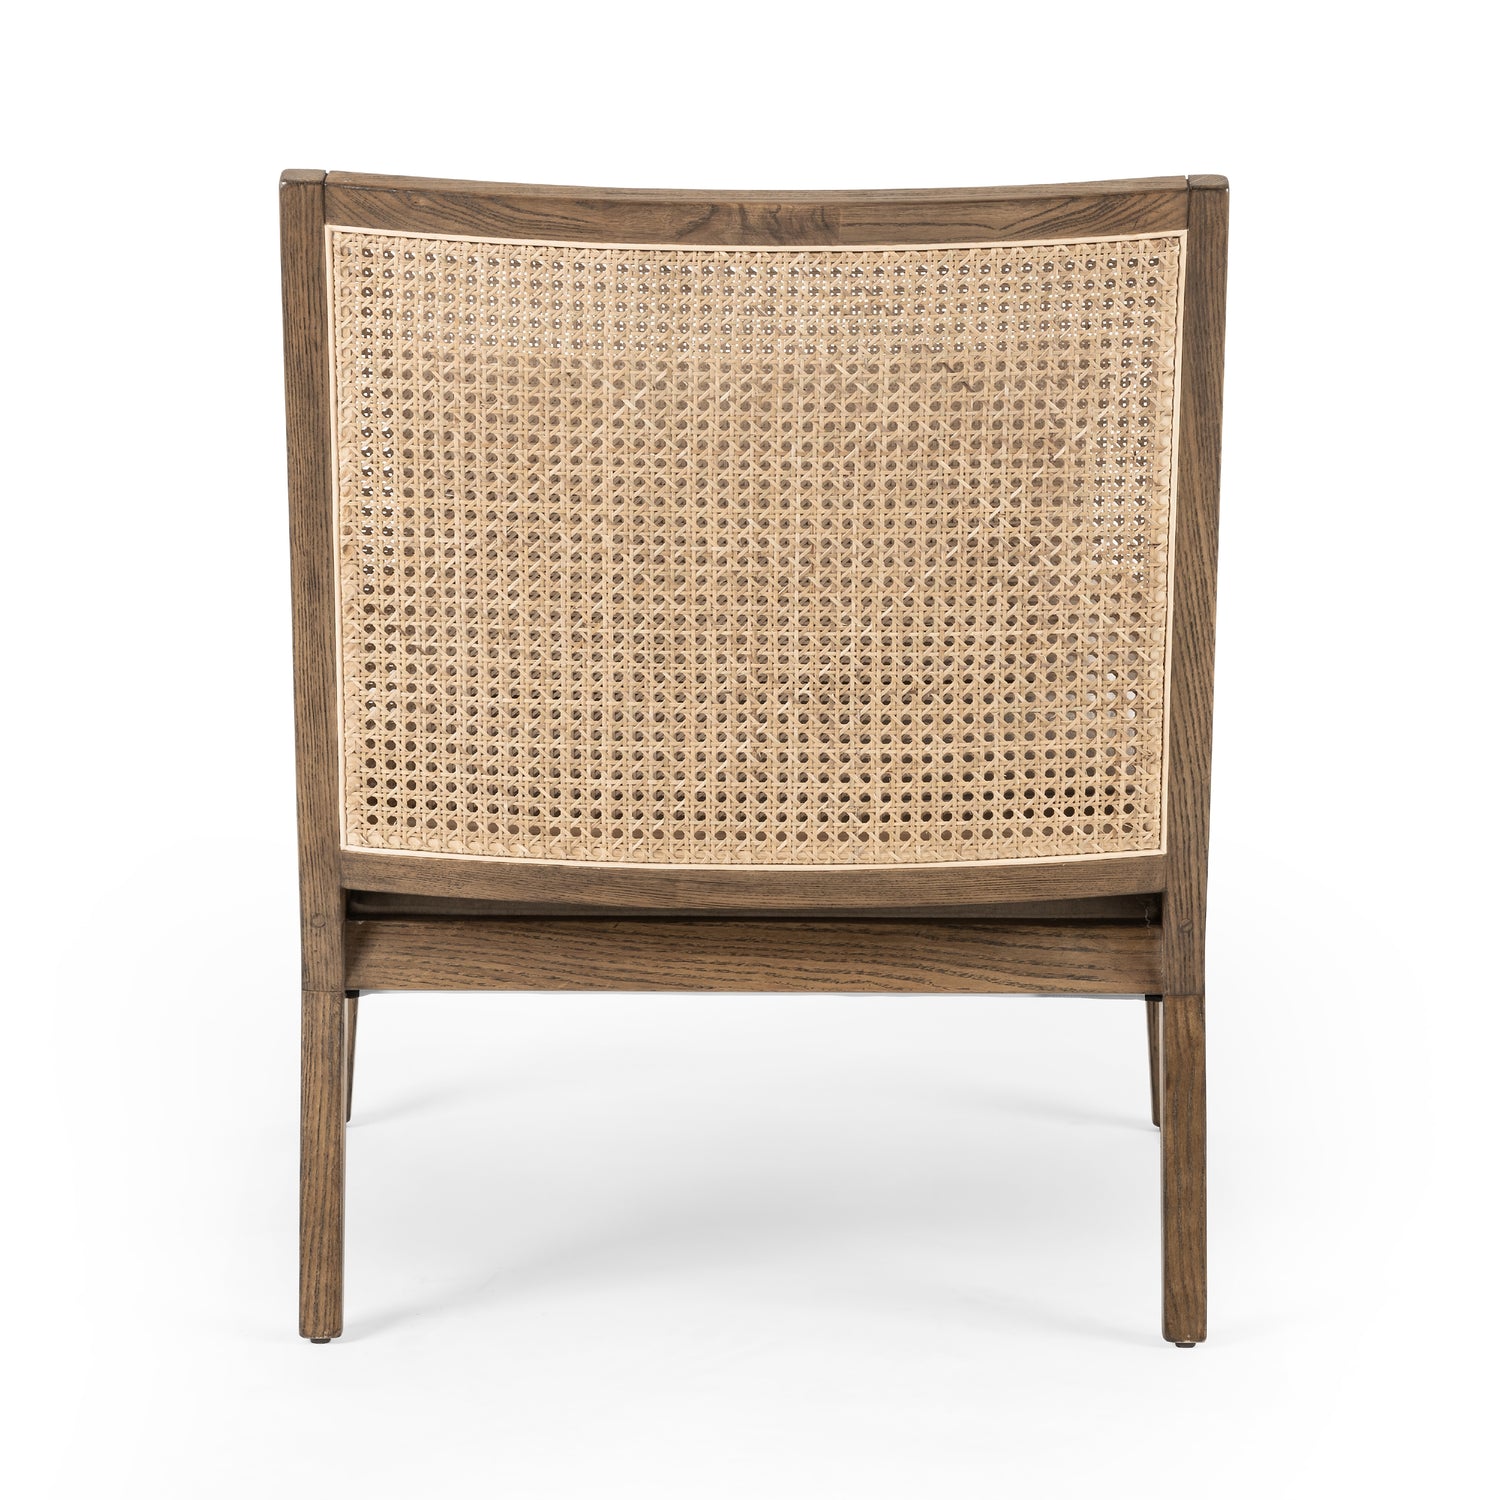 Savile Flax Fabric & Light Natural Cane with Toasted Parawood | Antonia Cane Chair | Valley Ridge Furniture